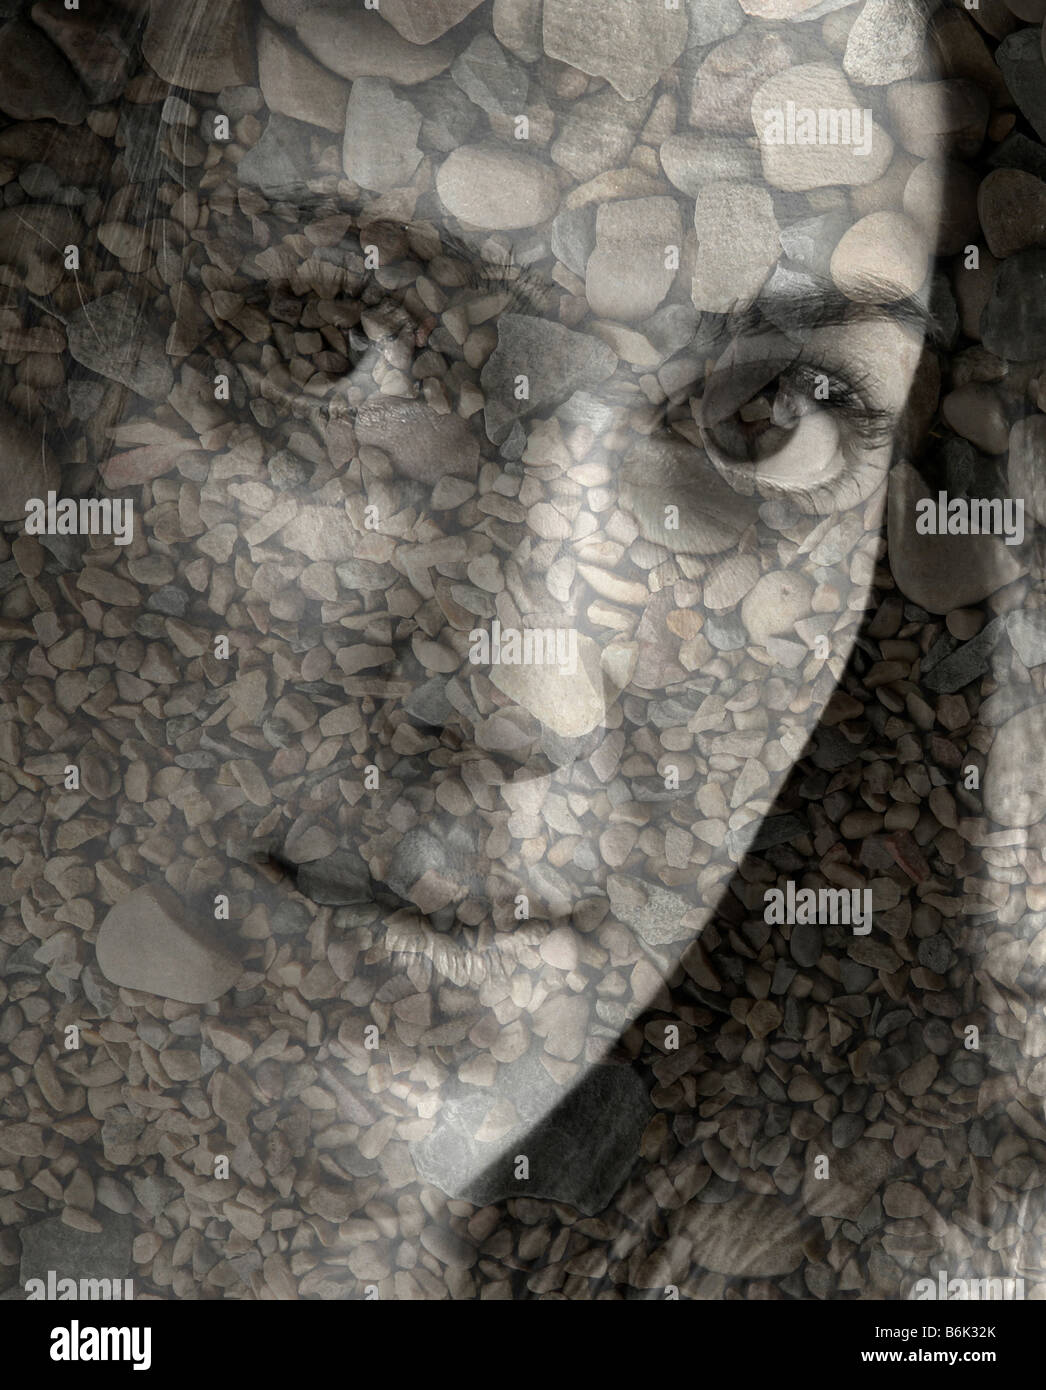 composite of a woman's face and rocks to resemble 'mother nature' Stock Photo